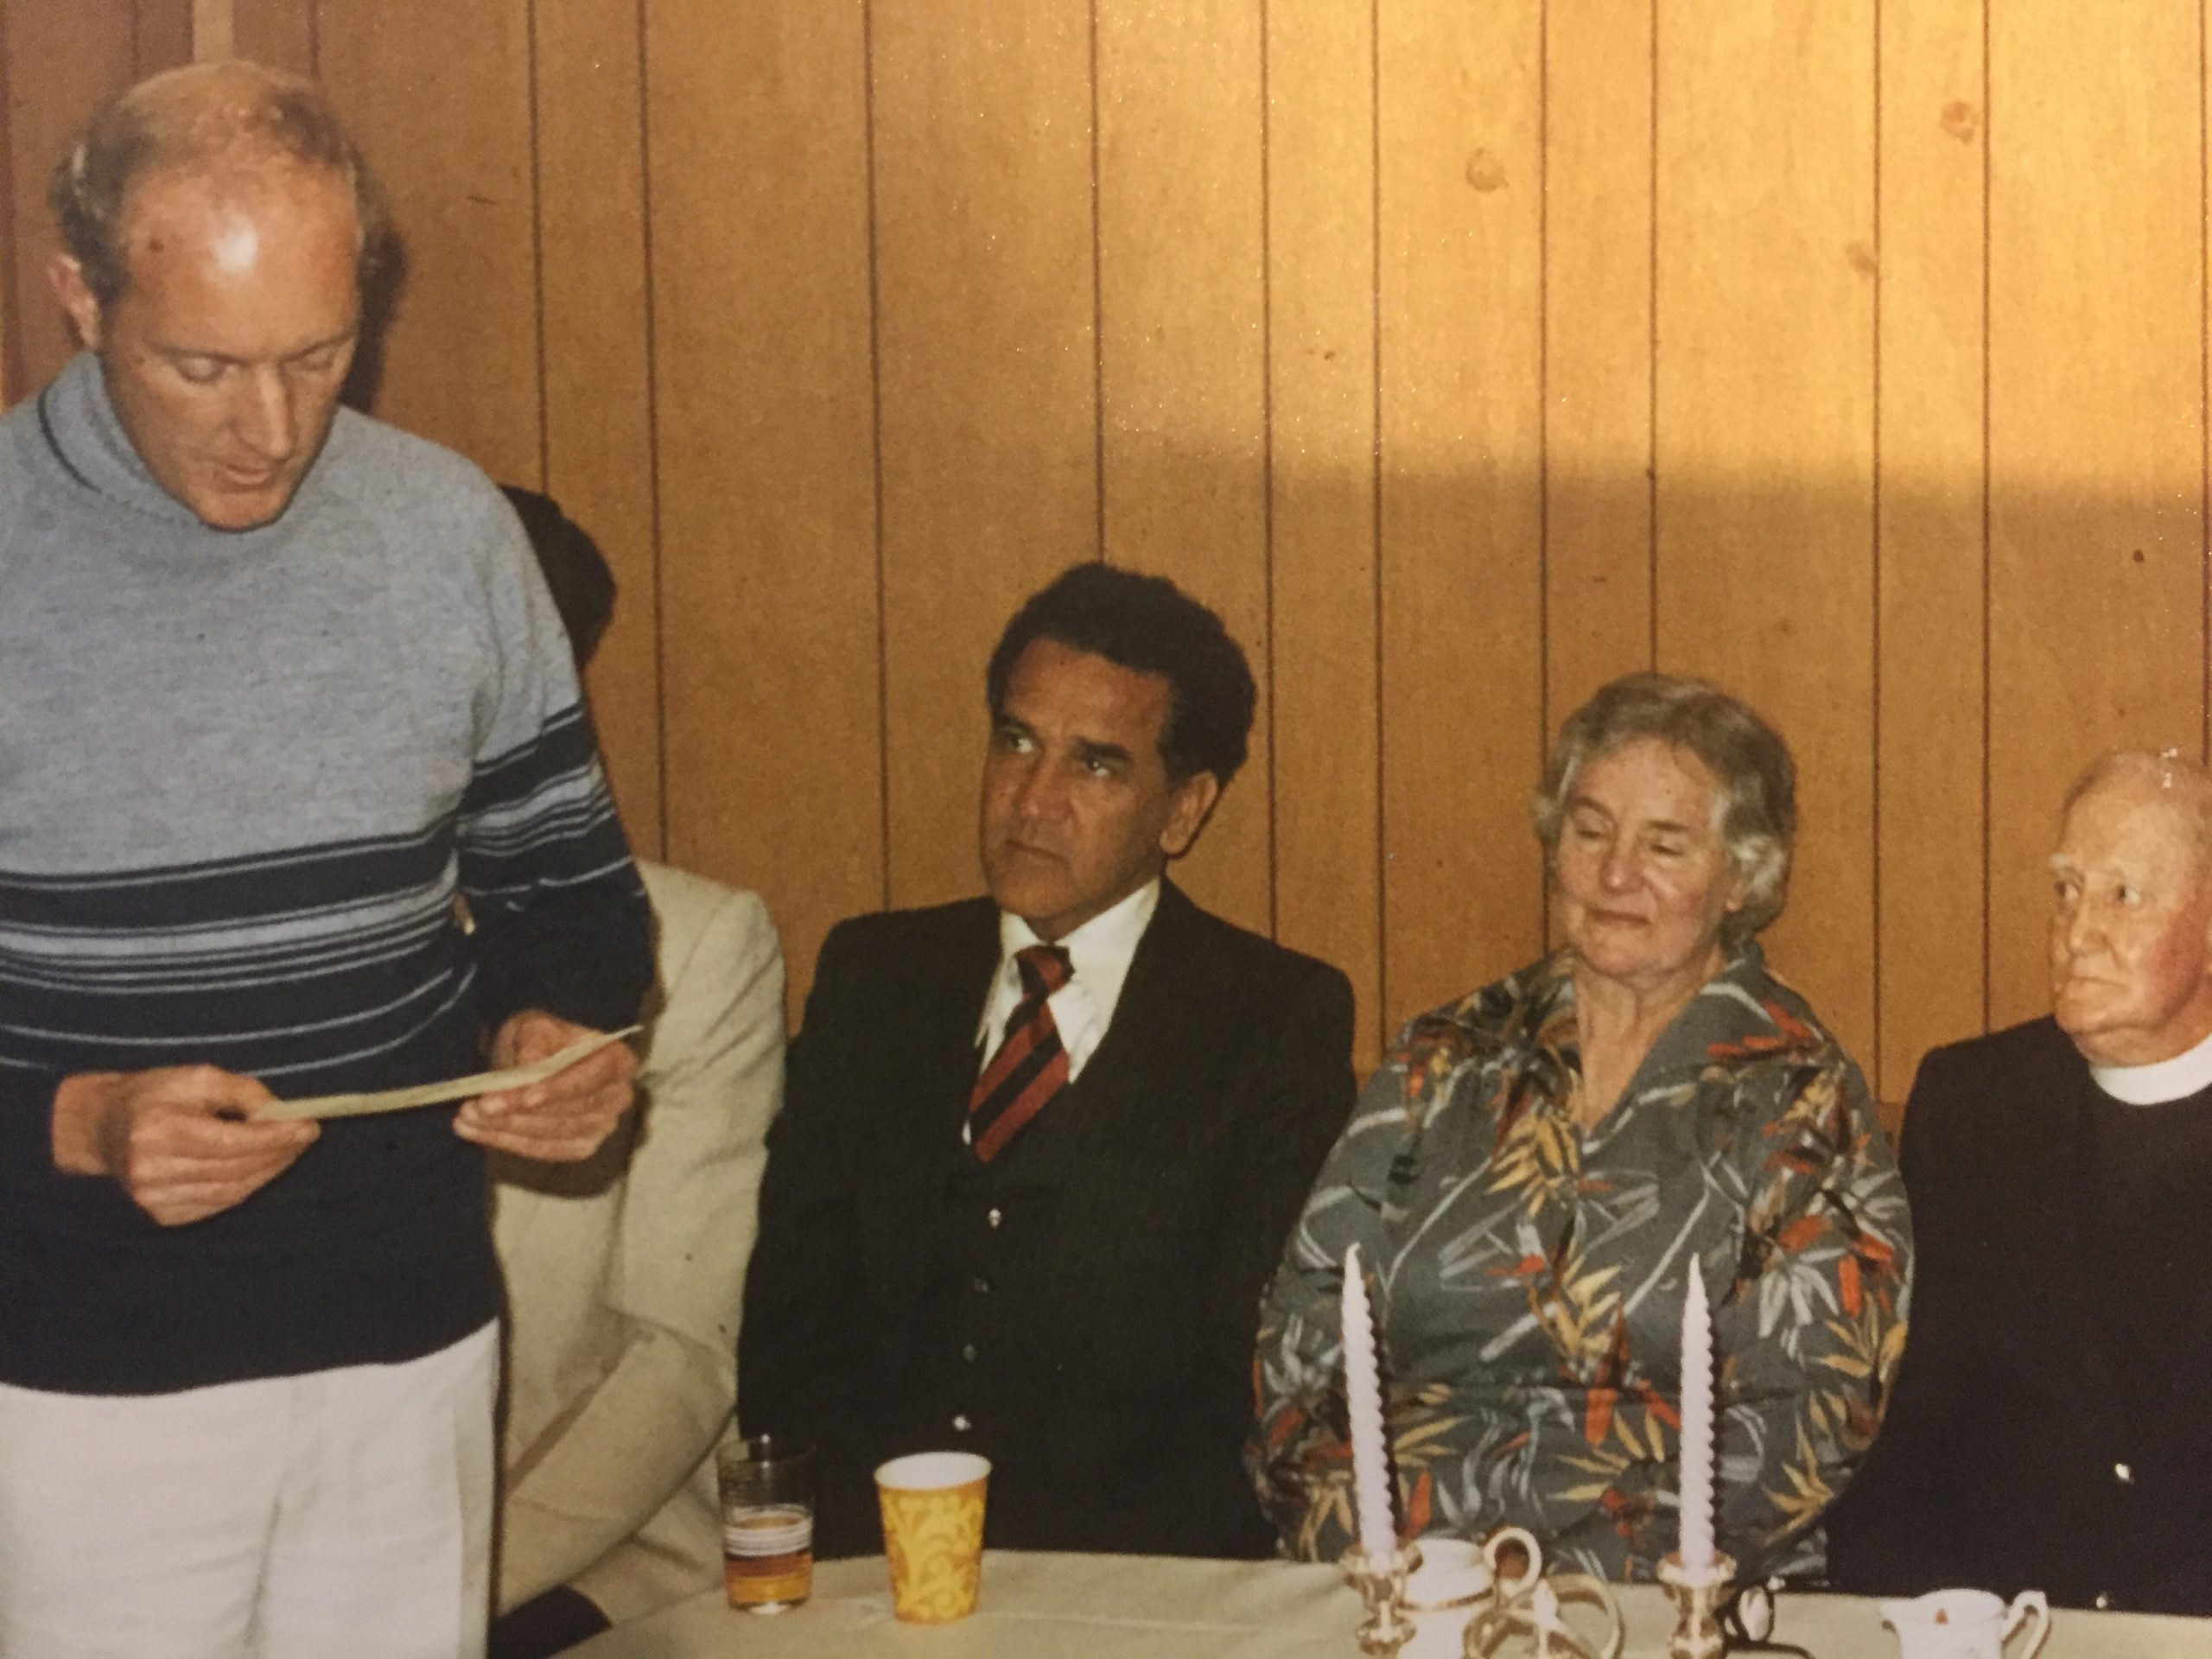 John P McD Smith with Charles Perkins AO, (Bill Espie – obscured), Isabel and Percy Smith at a gathering to celebrate Percy’s award from Queen Elizabeth II in the 1980 Queen’s Birthday Honours